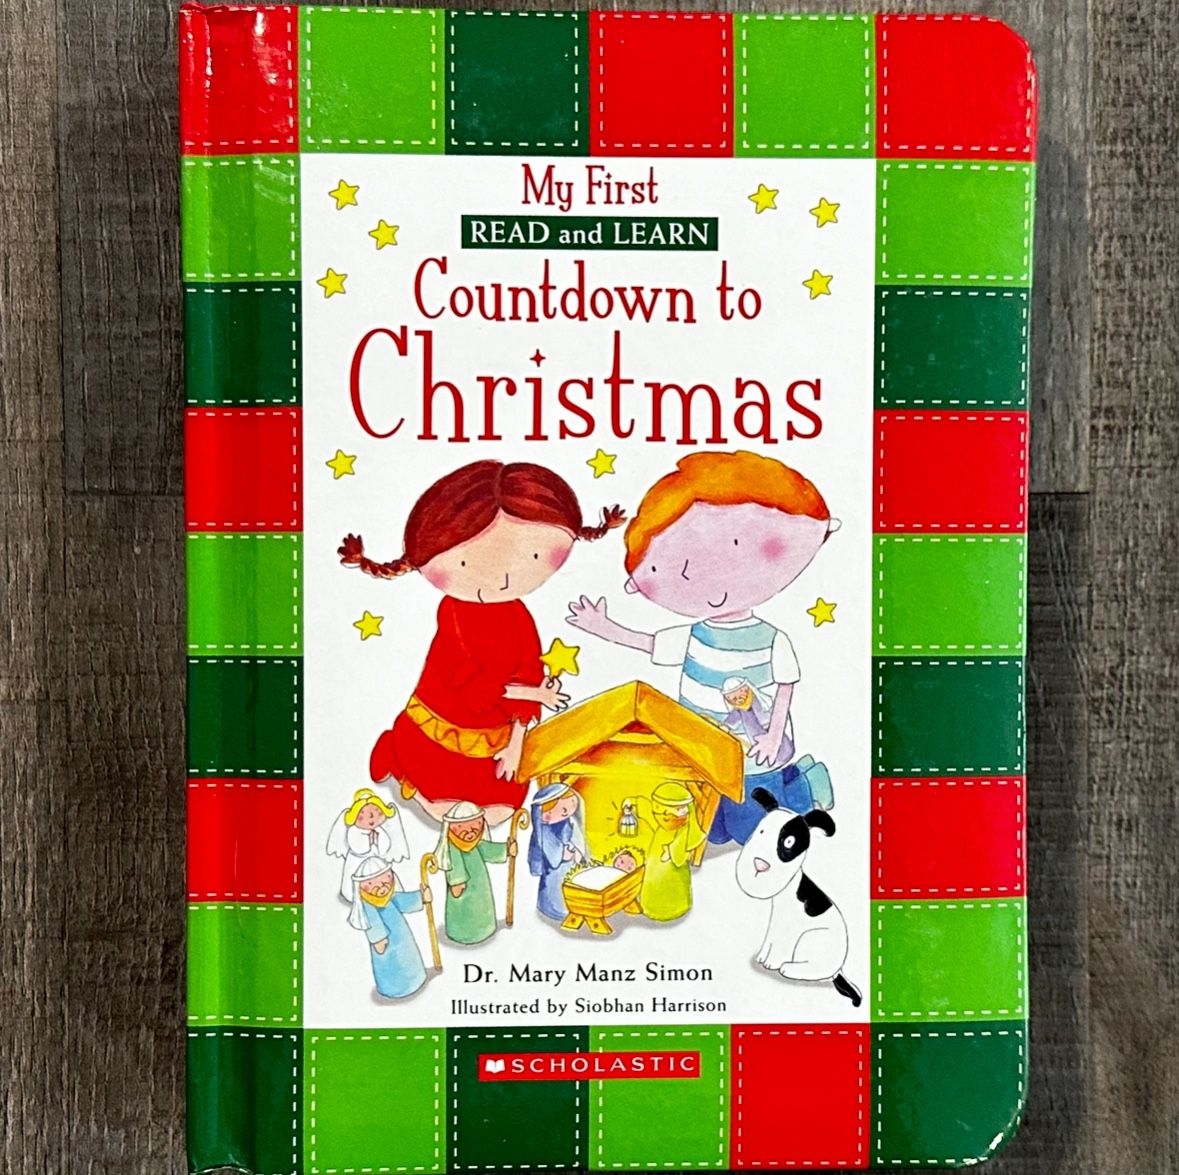 New “My First Read and Learn Countdown to Christmas” Holiday Board Book